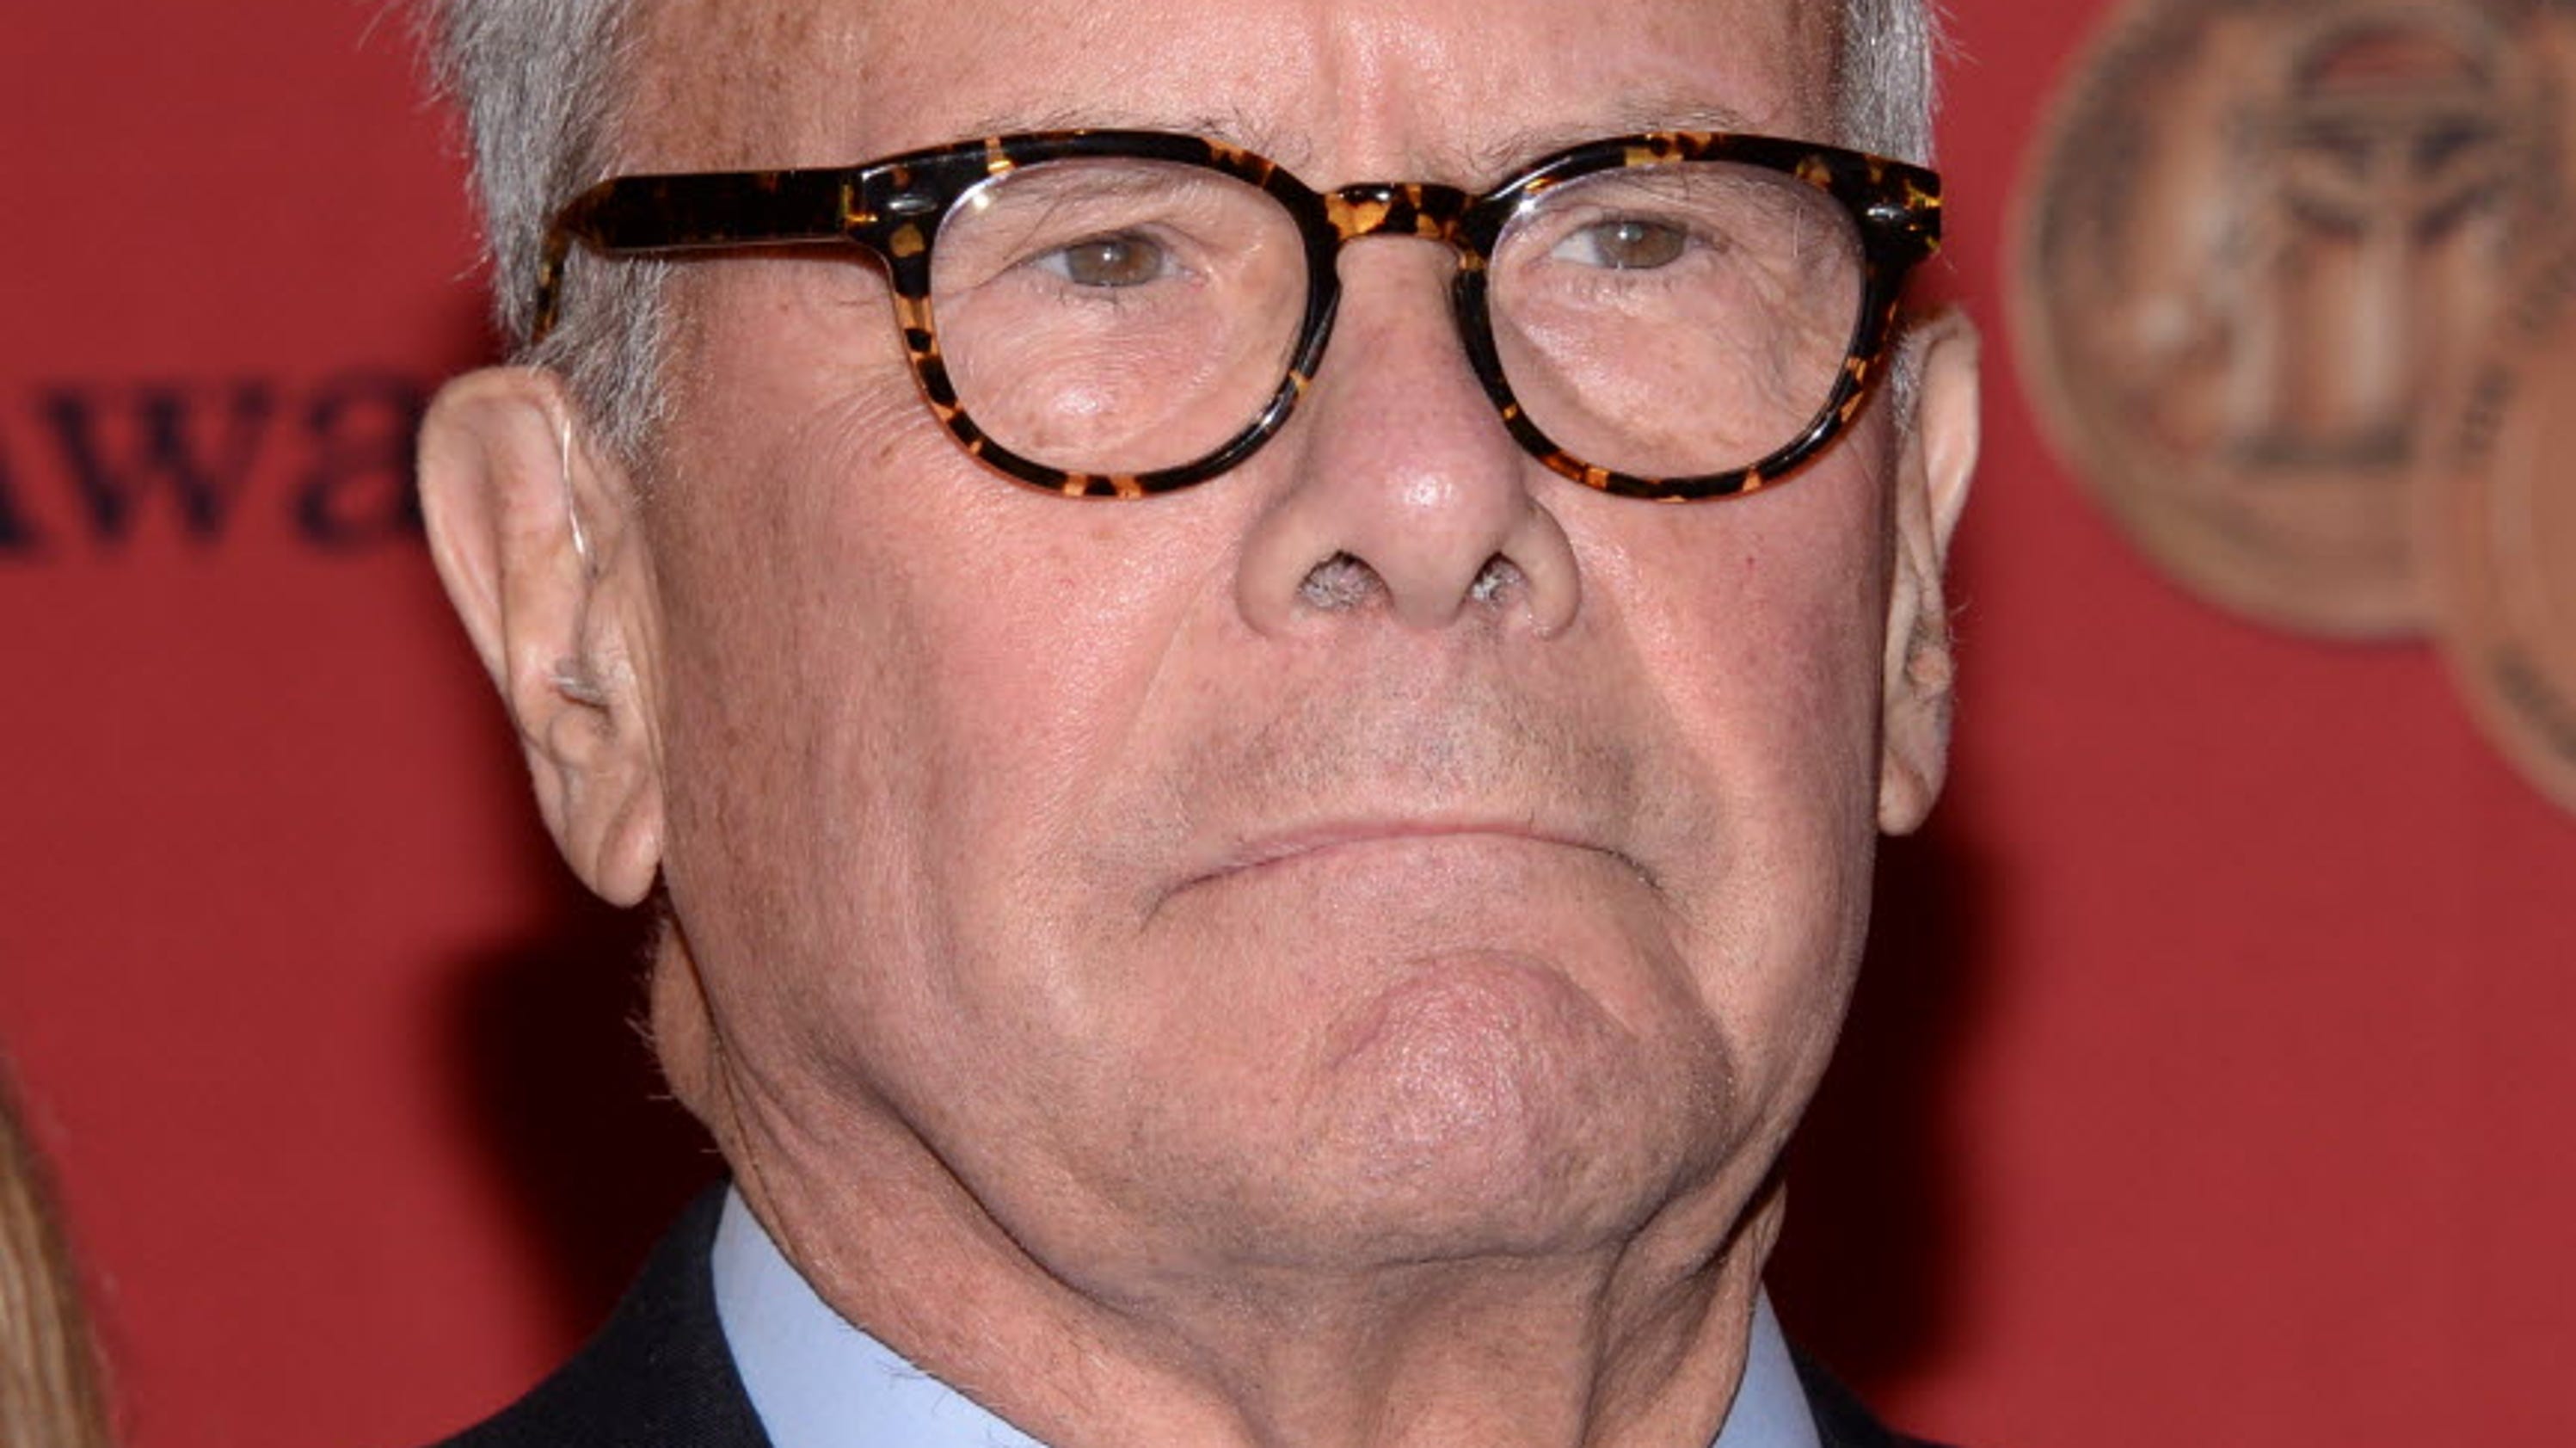 NBC News chief, Tom Brokaw react to new sexual misconduct allegations against the former anchor